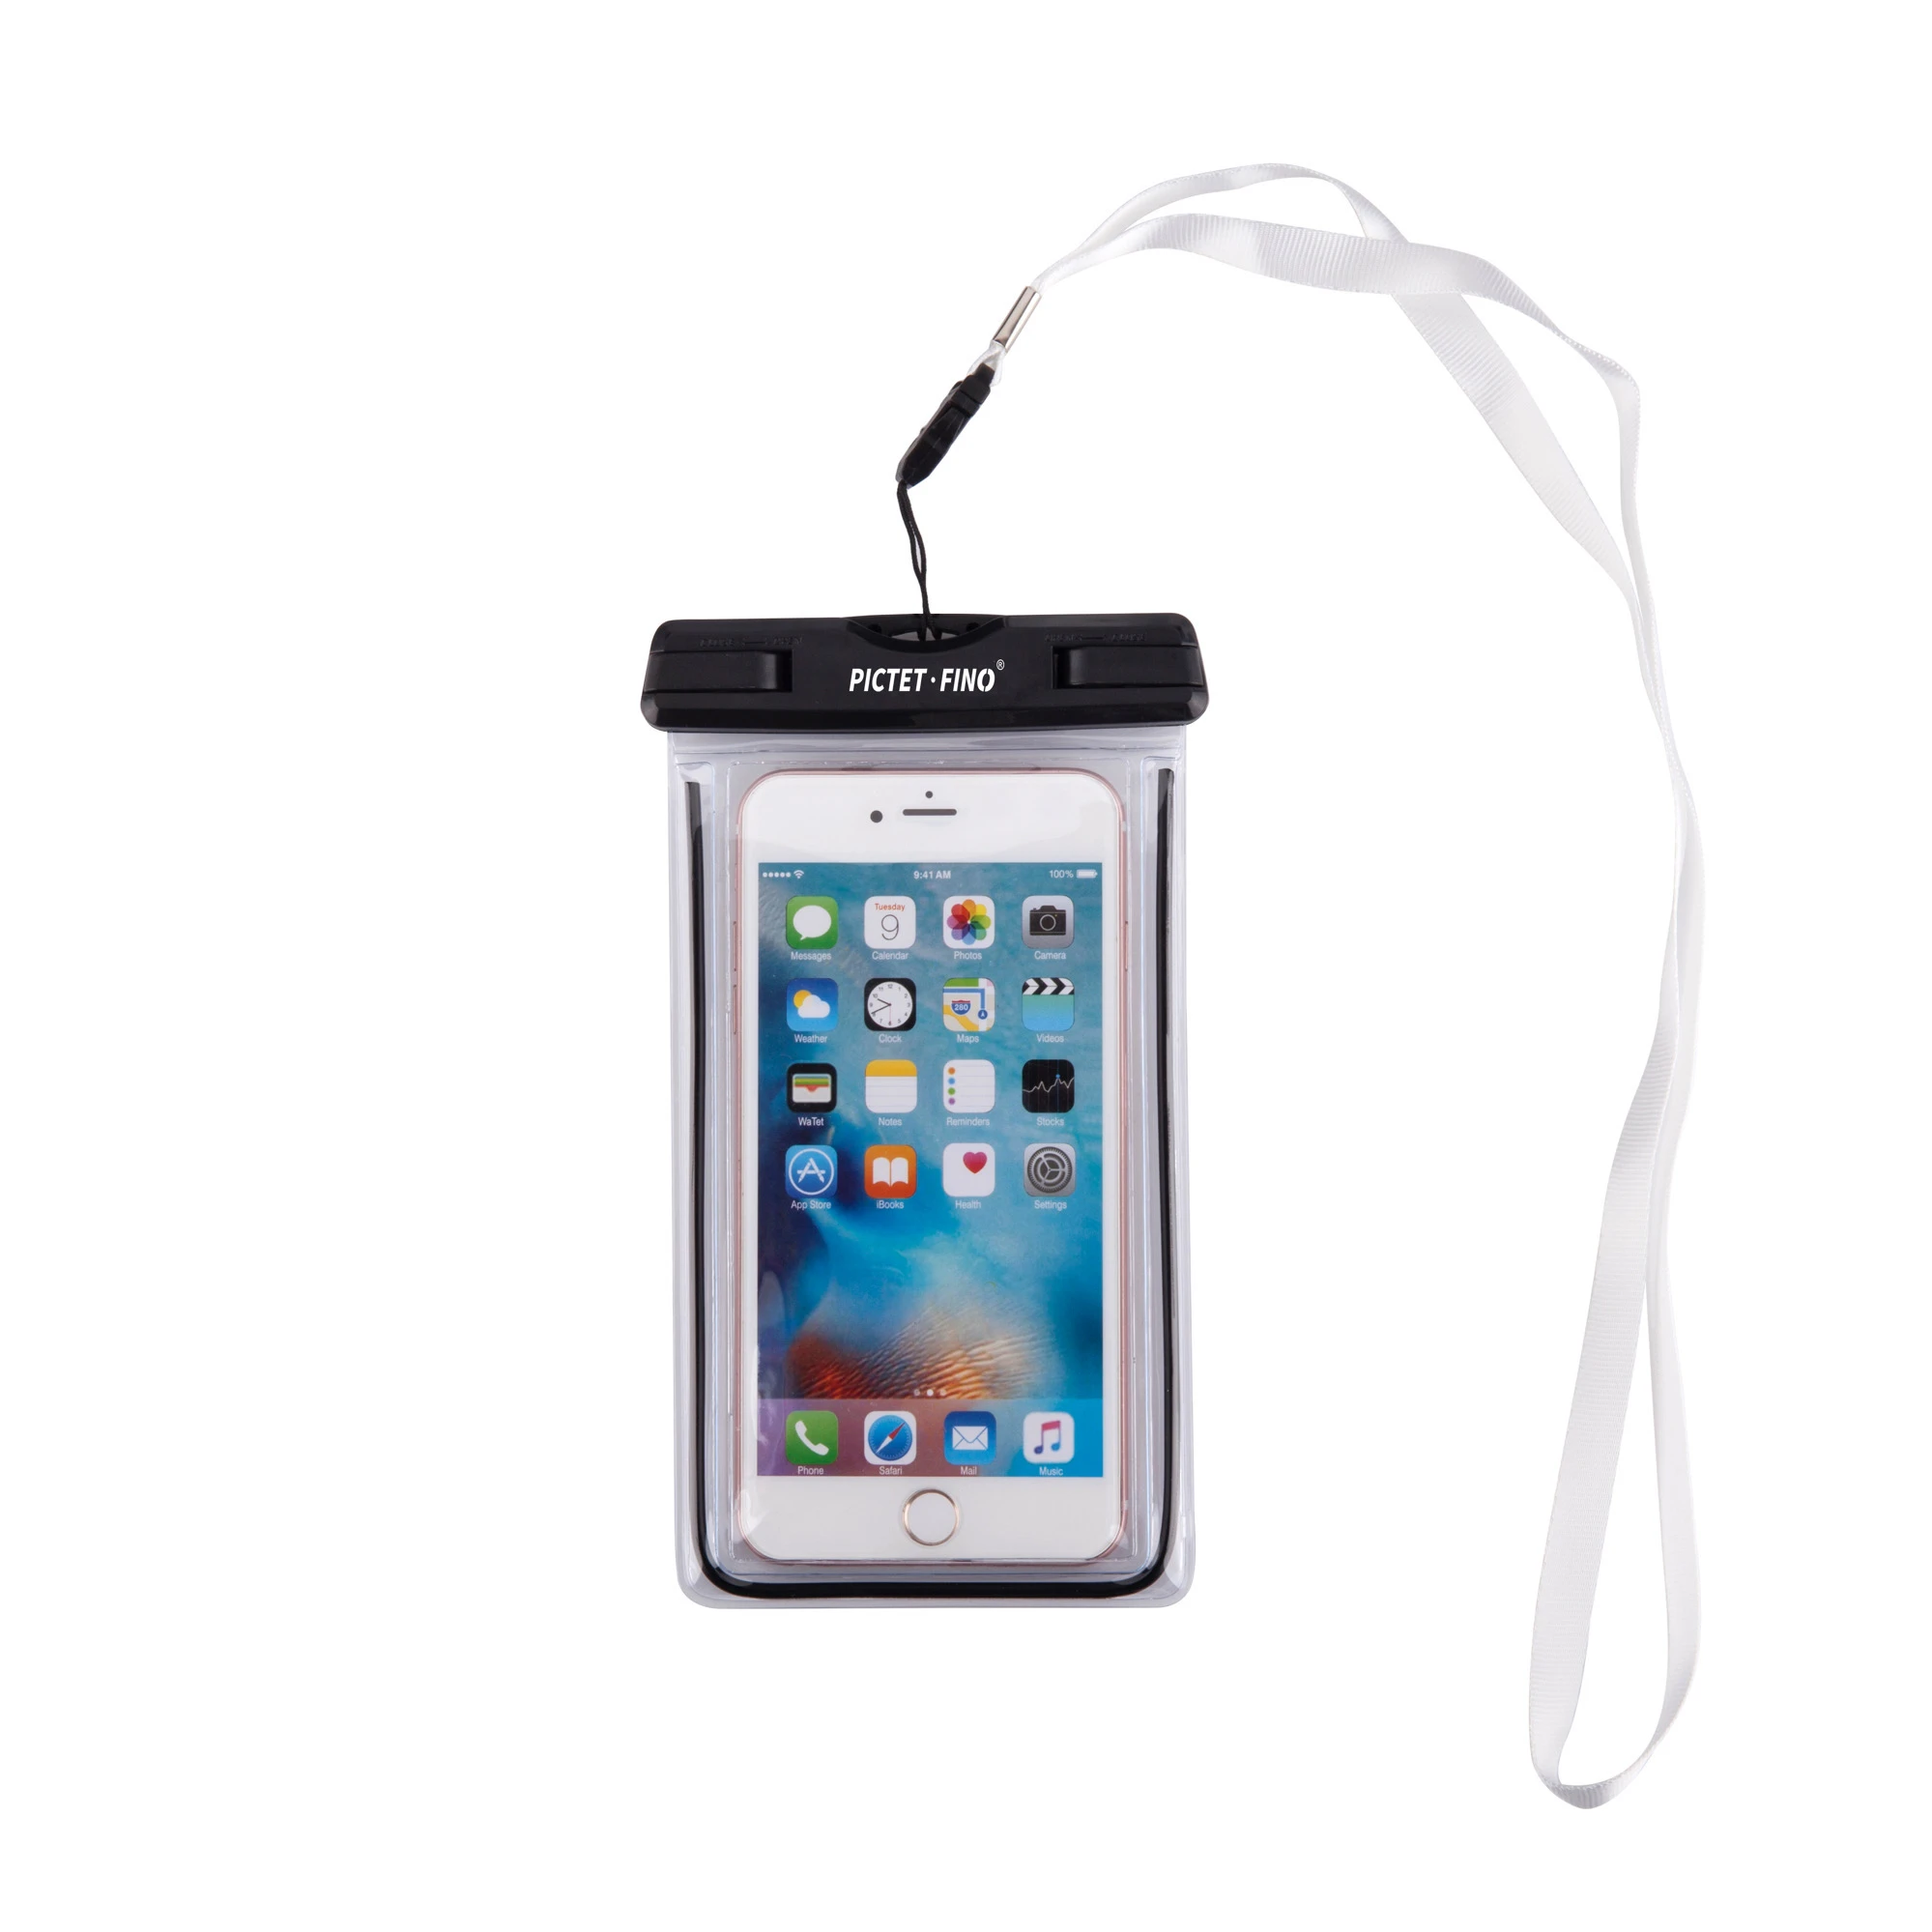 2020 hottest luminous waterproof mobile phone bag suitable for swimming, Hot Spring and other water travel mobile phone bags